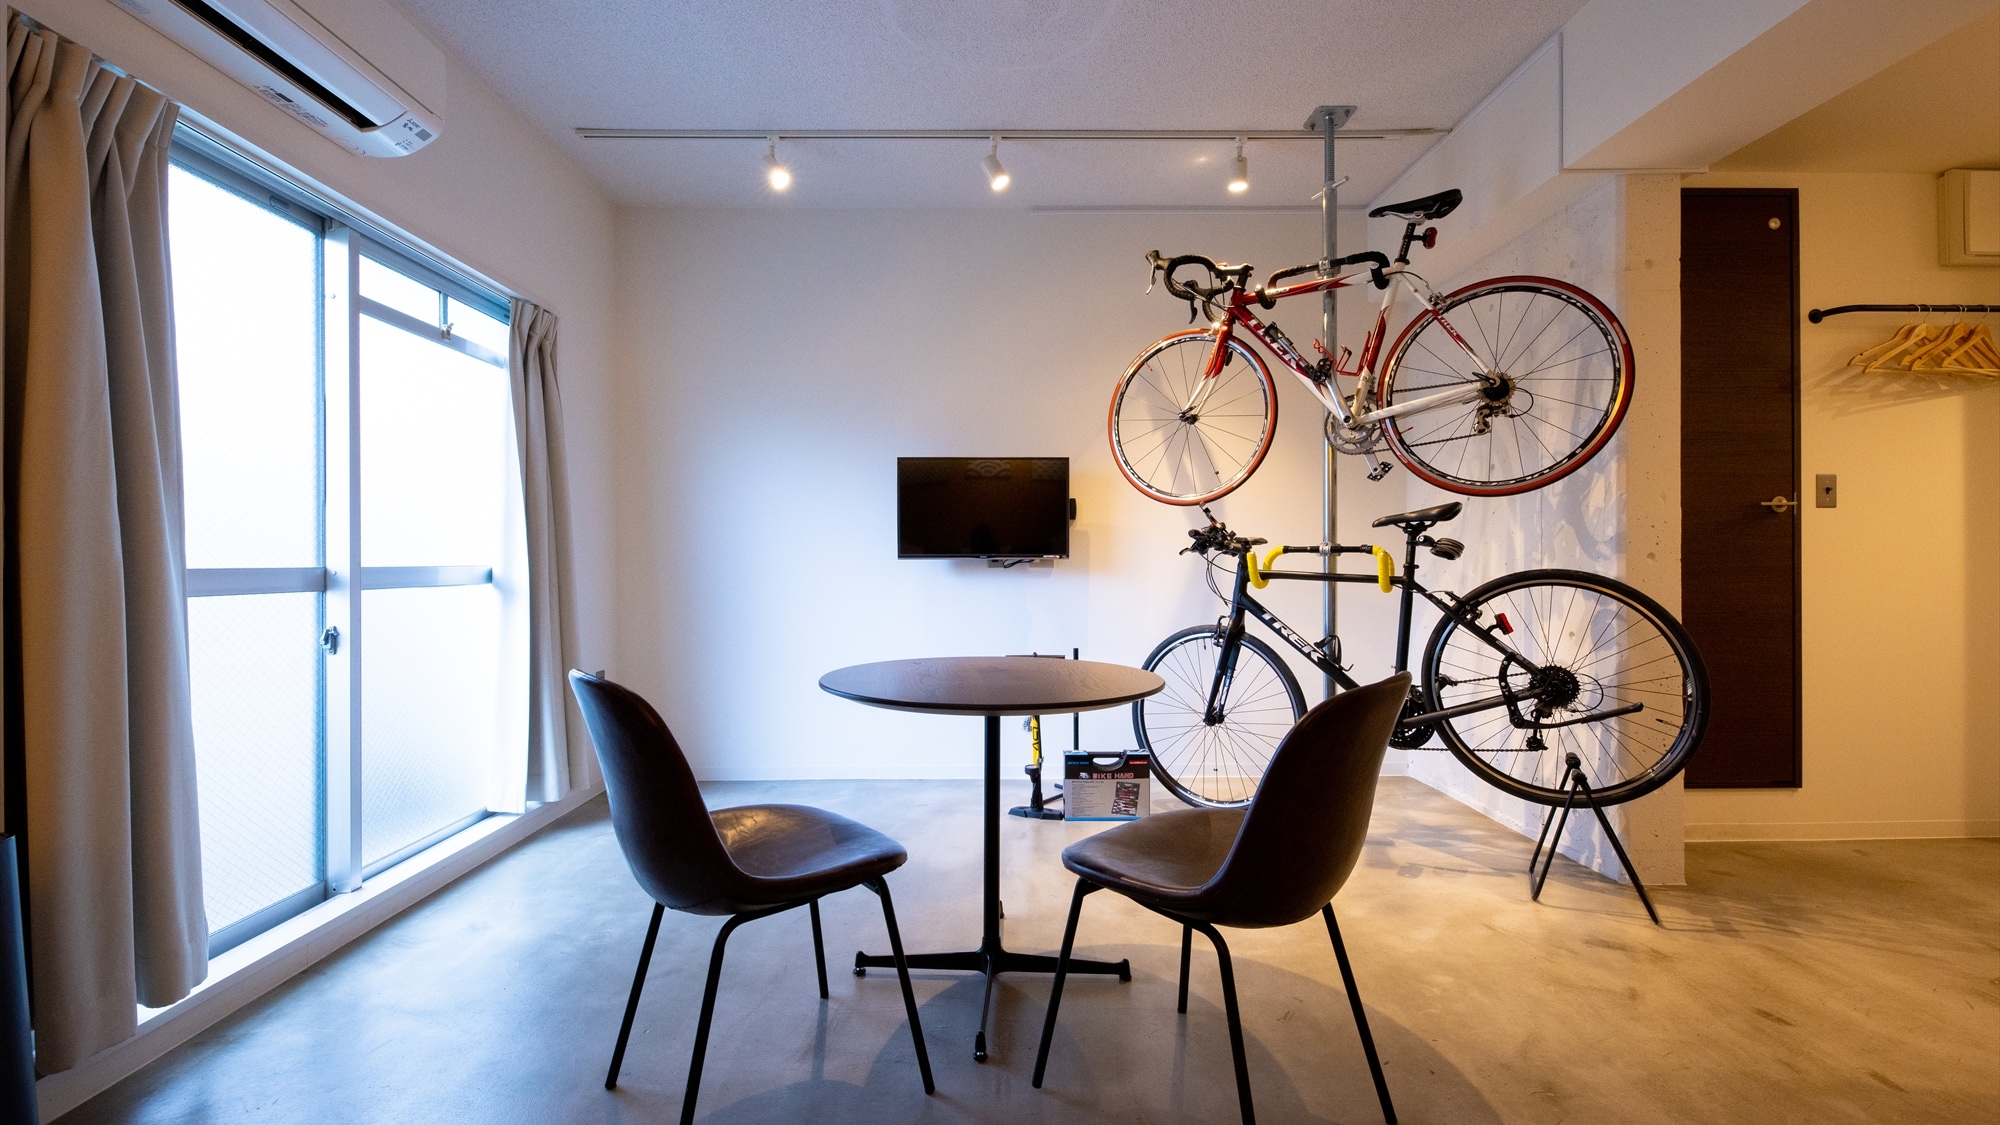 There is also a space to put a bicycle in the room